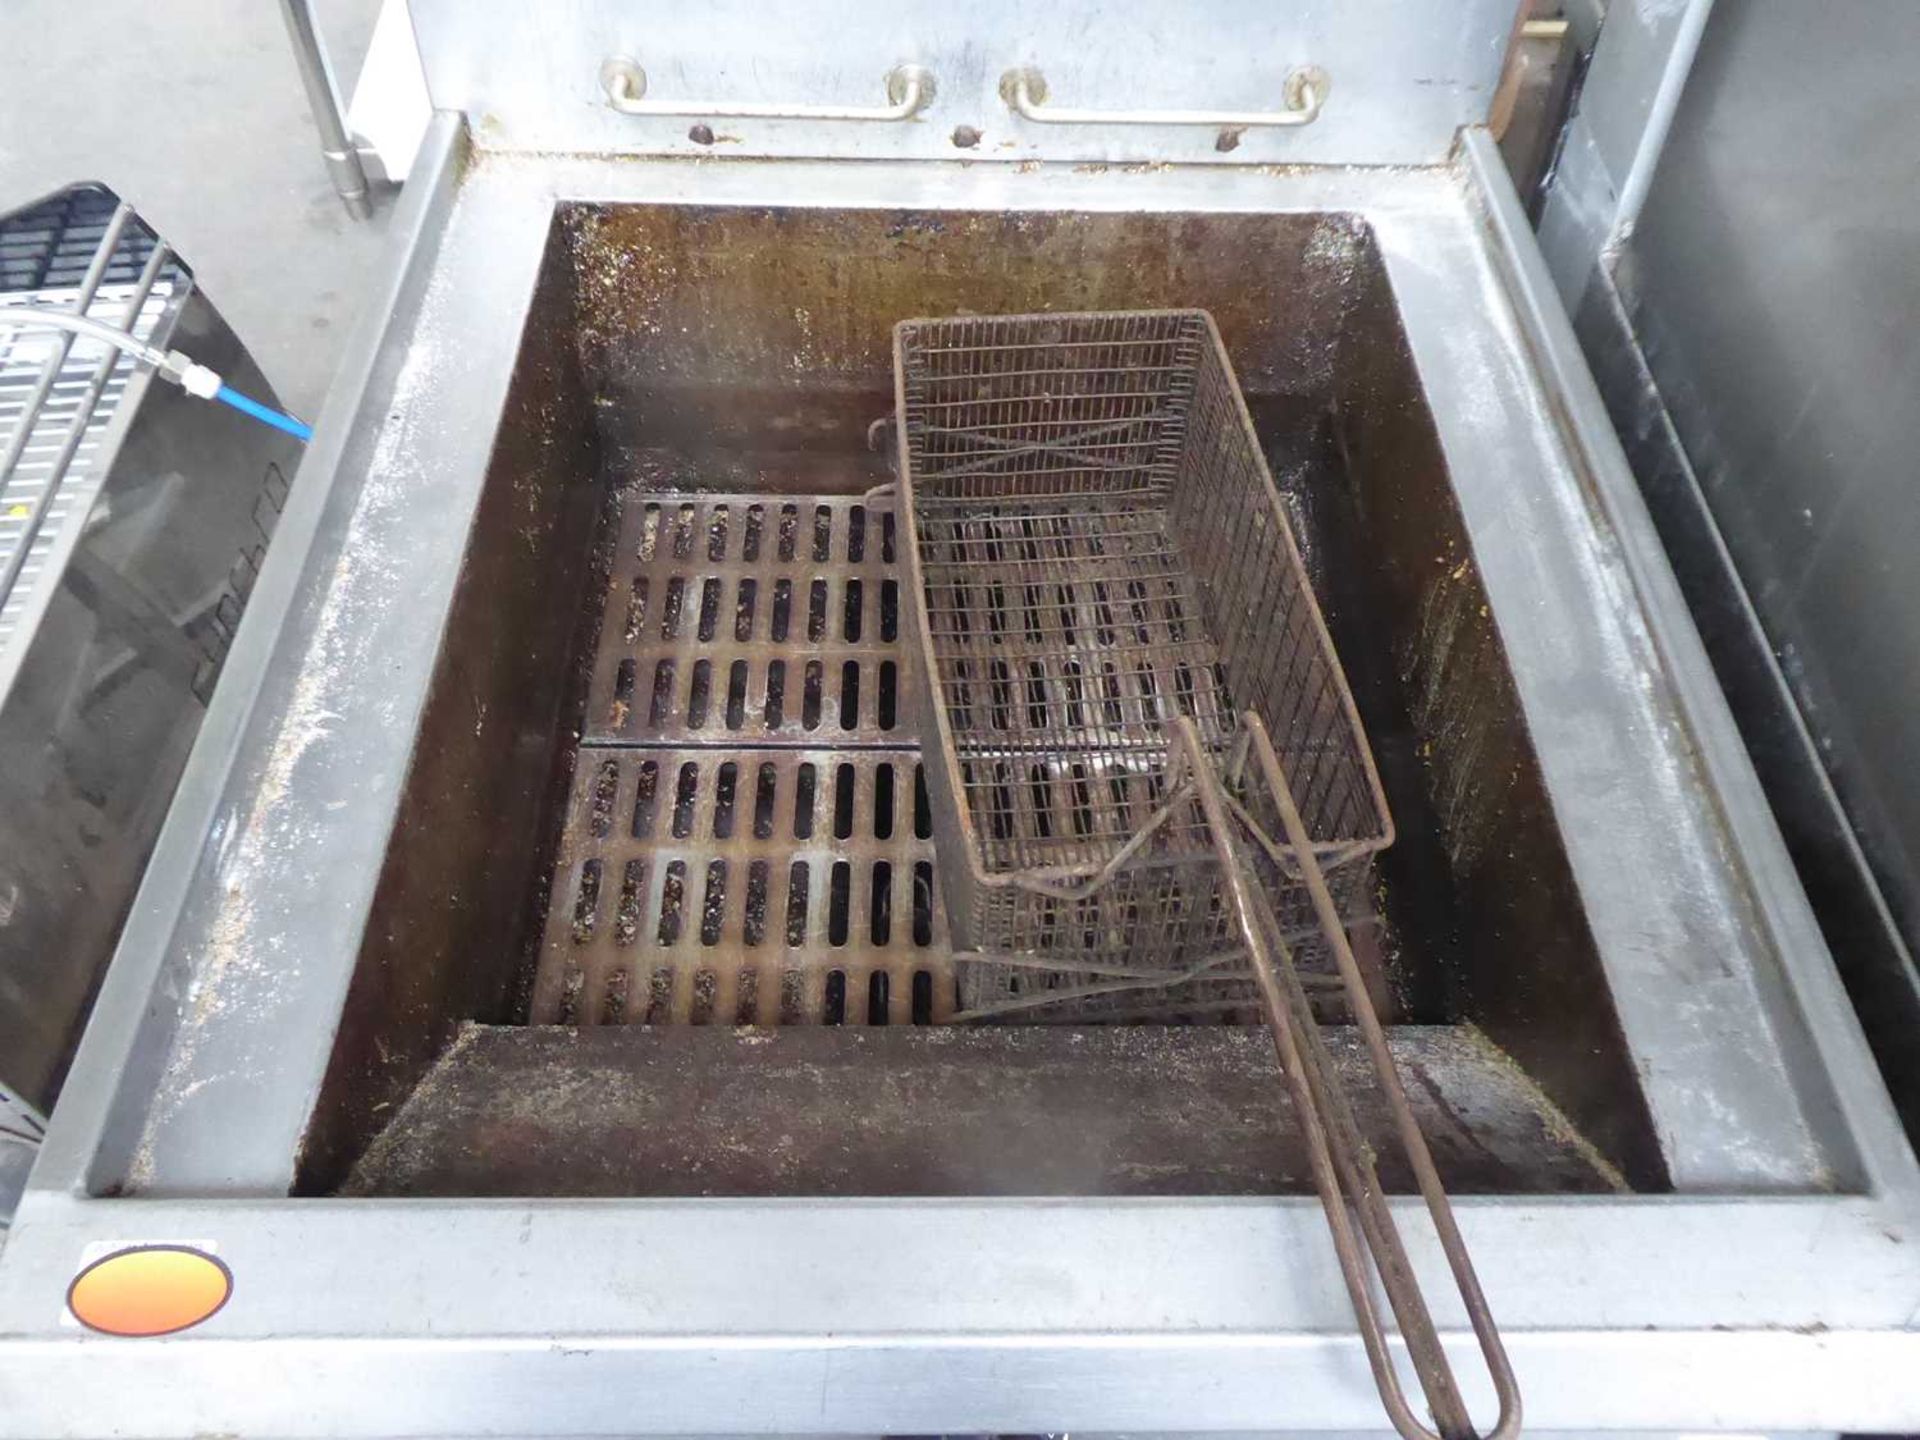 60cm gas Falcon large single well fryer - Image 2 of 2